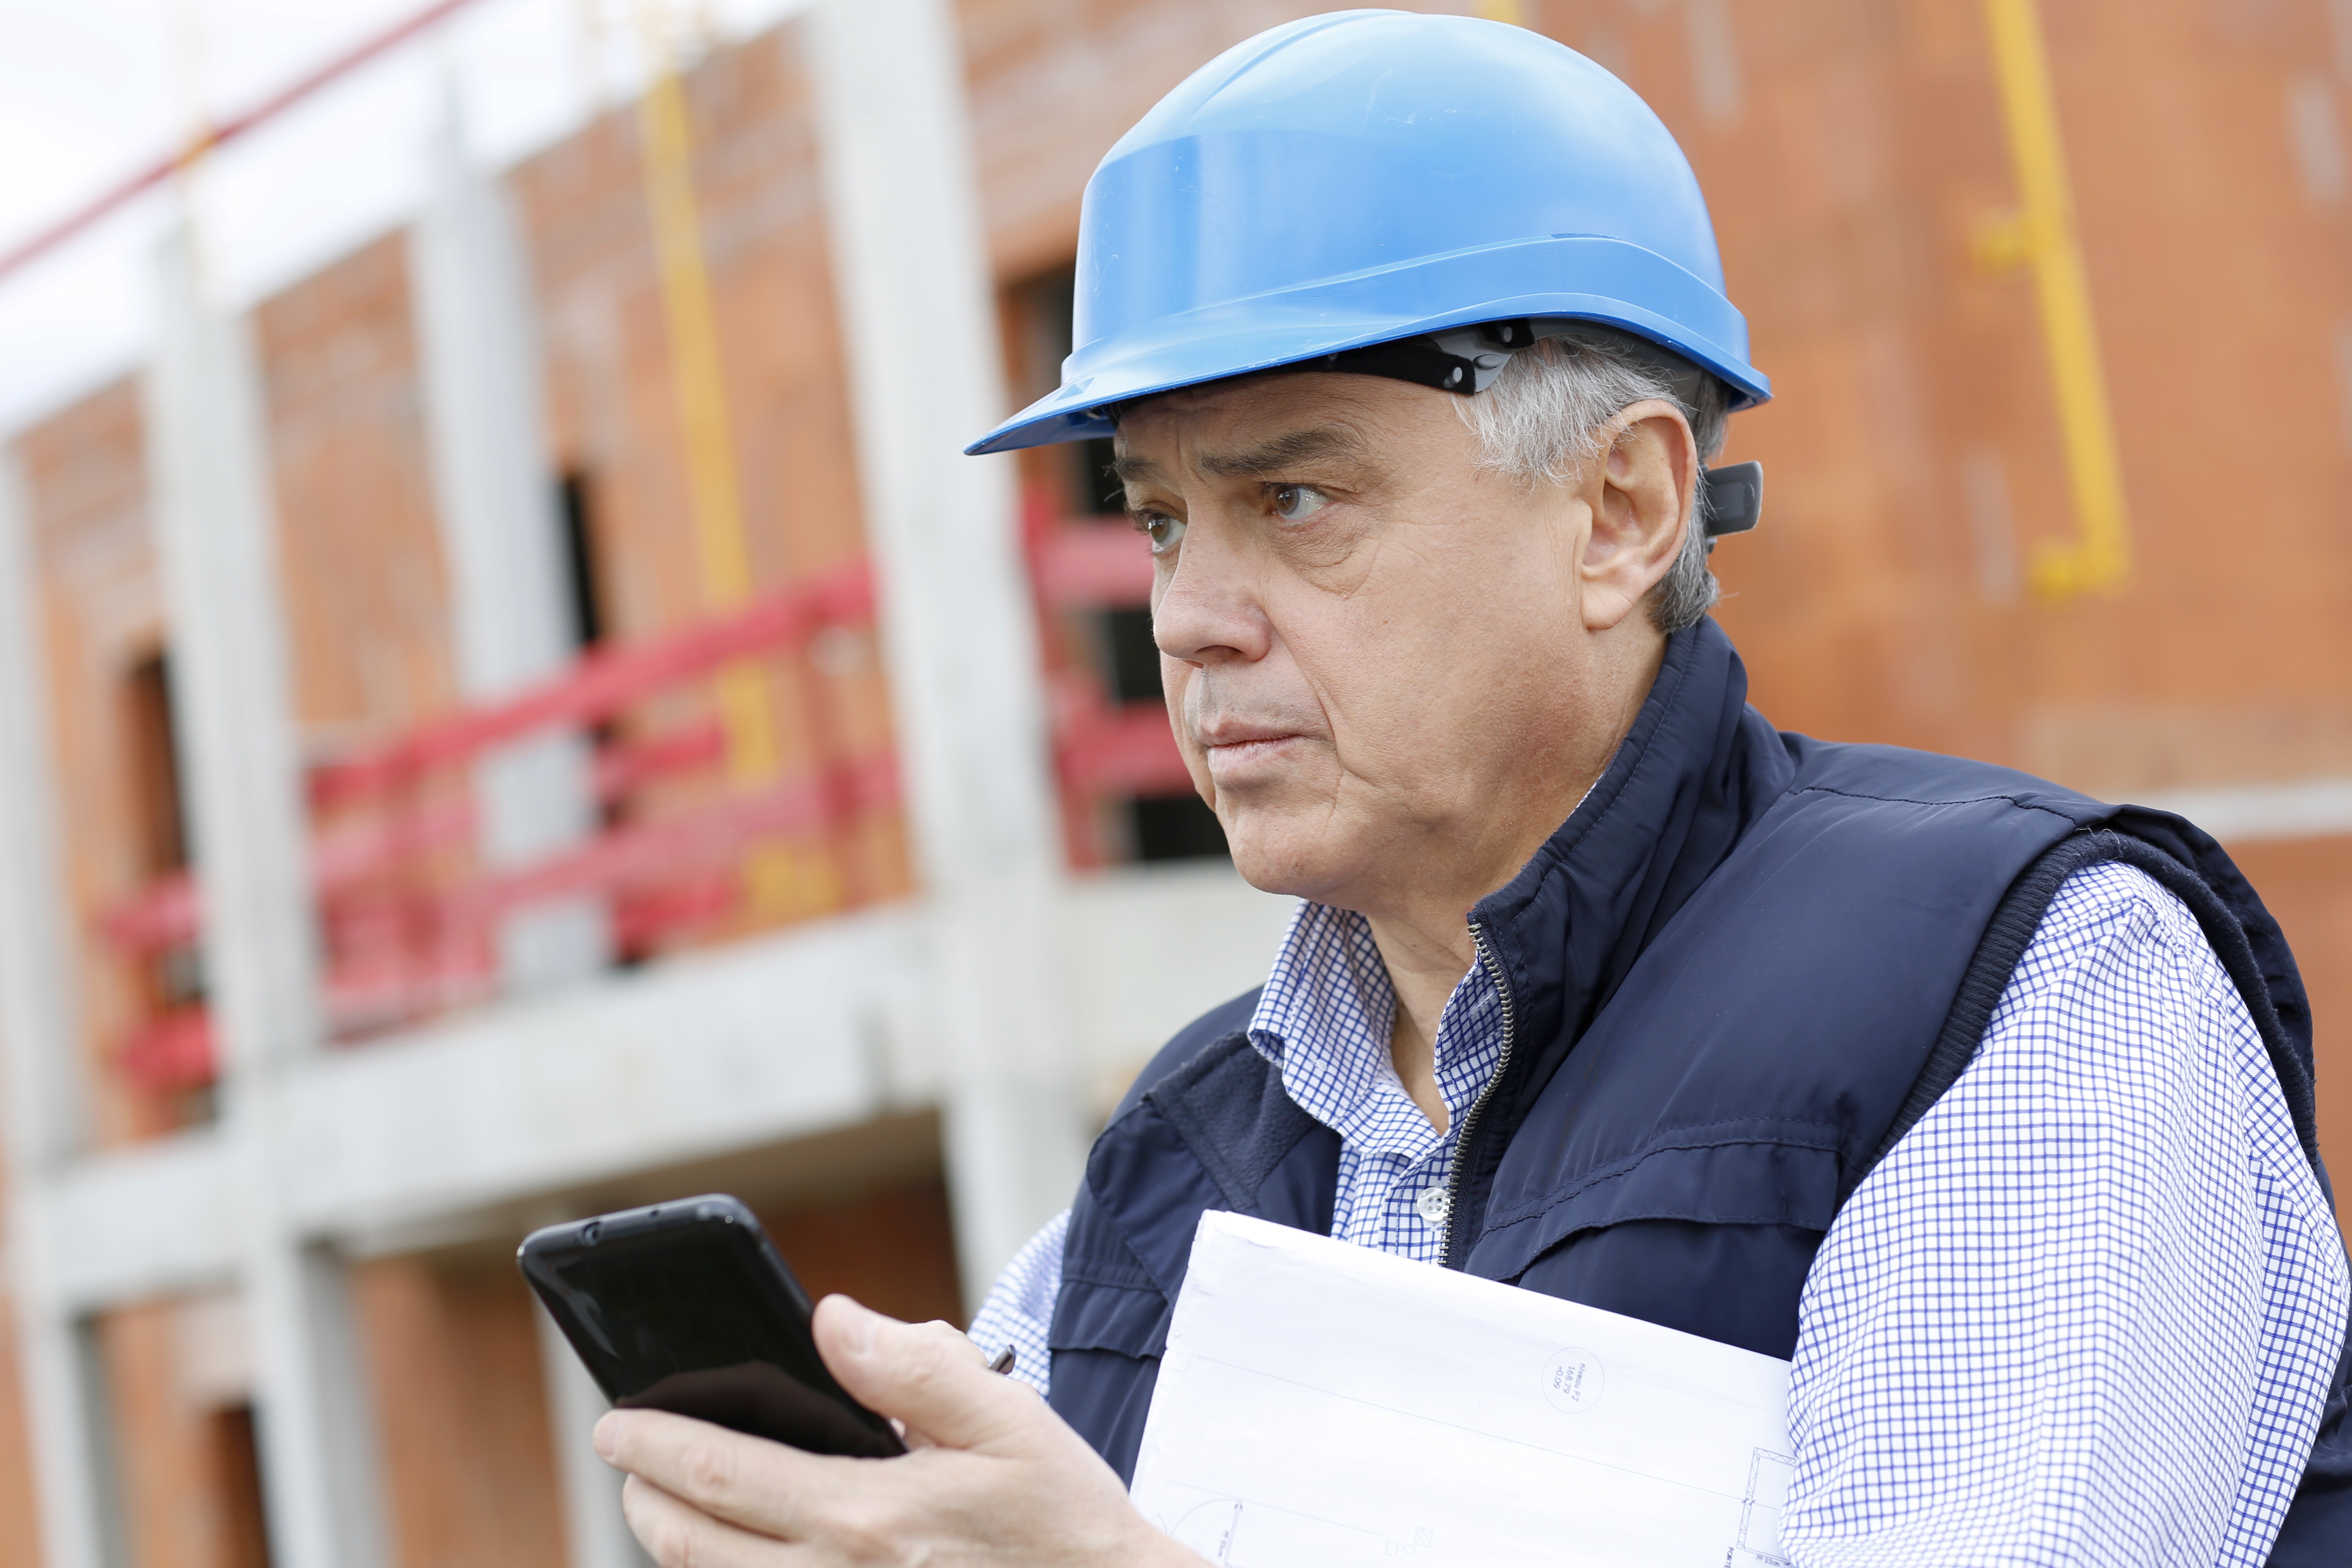 Safety worker with phone, mobile app